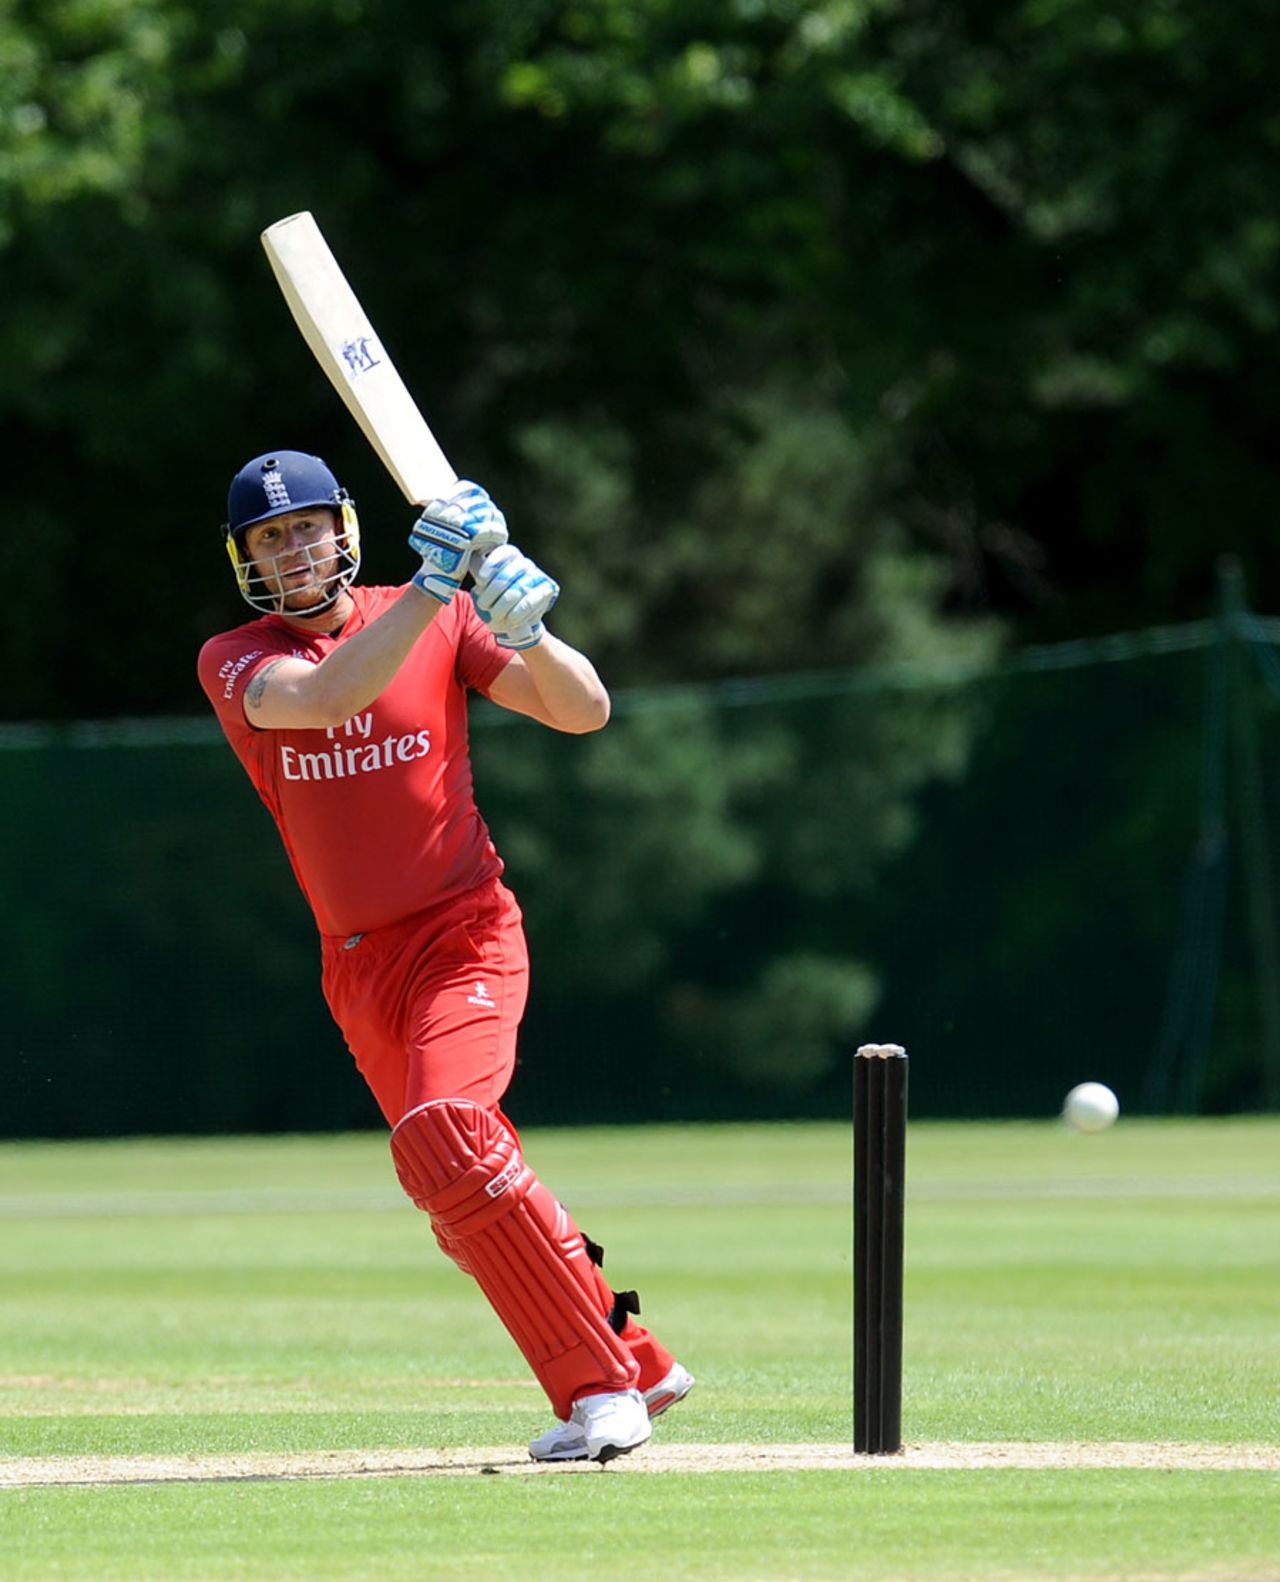 Andrew Flintoff made 16 opening the batting for Lancashire twos, Lancashire 2nd XI v Leicestershire 2nd XI, Arundel, June 5, 2014